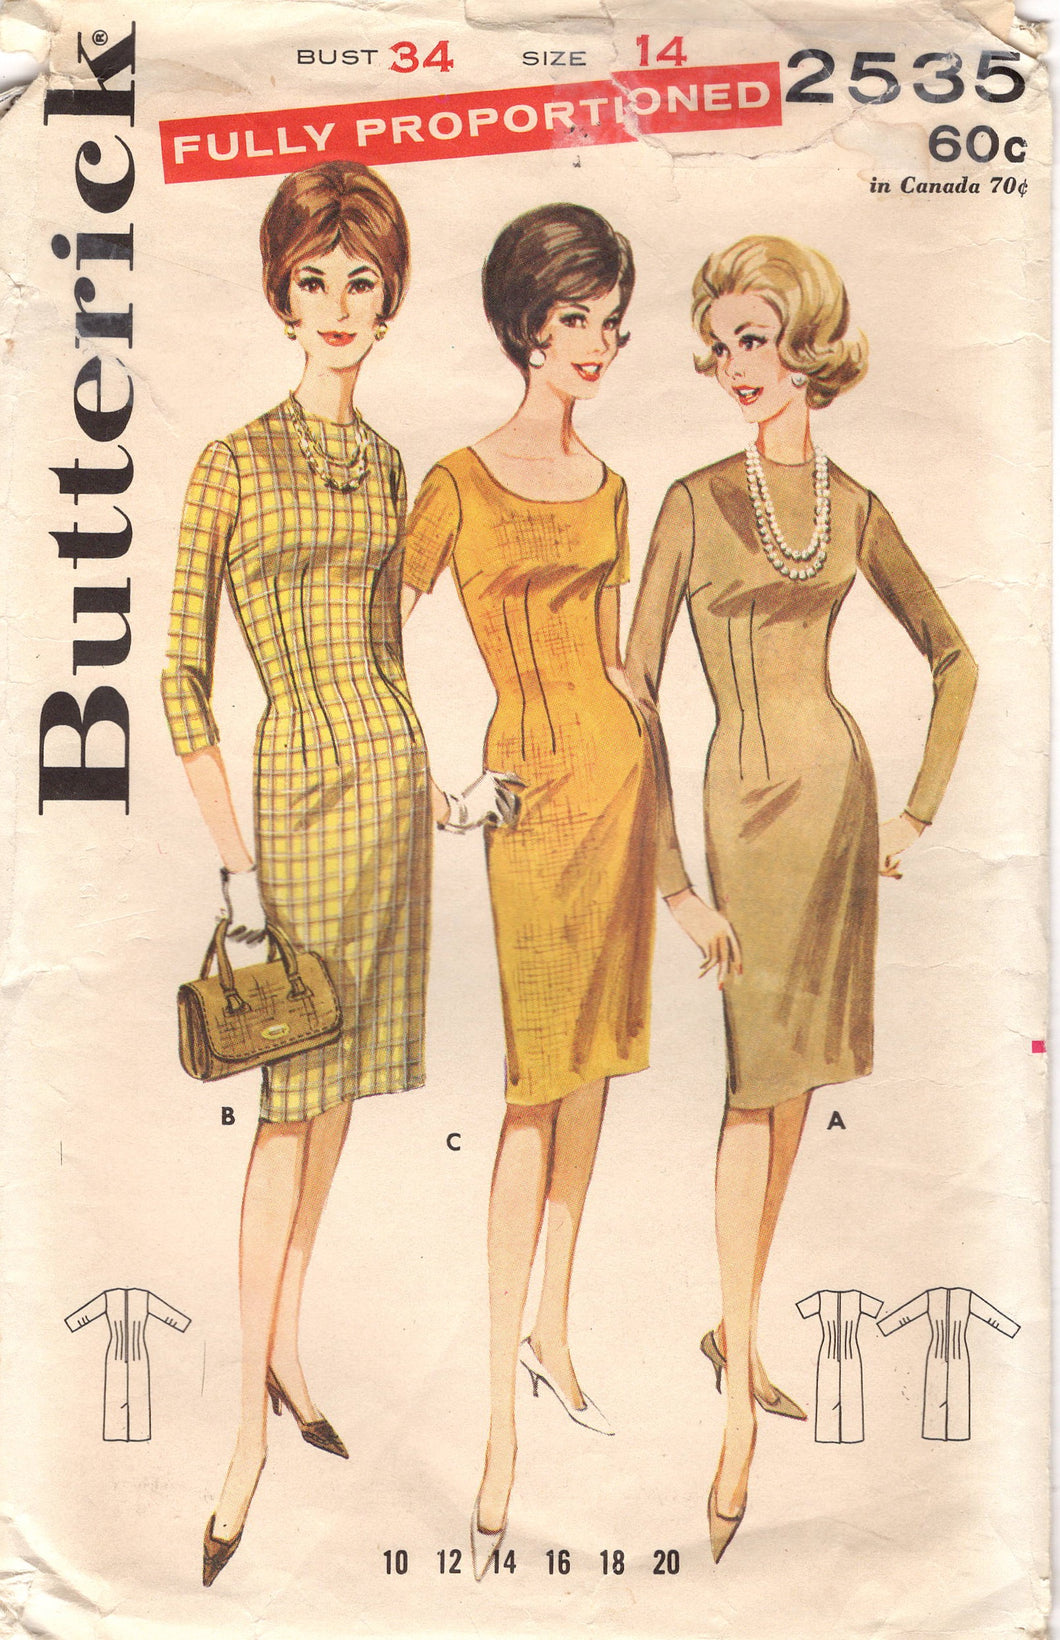 1960's Butterick One Piece Sheath Dress with Scoop or High Neckline and Long or Short Sleeve Options- Bust 34